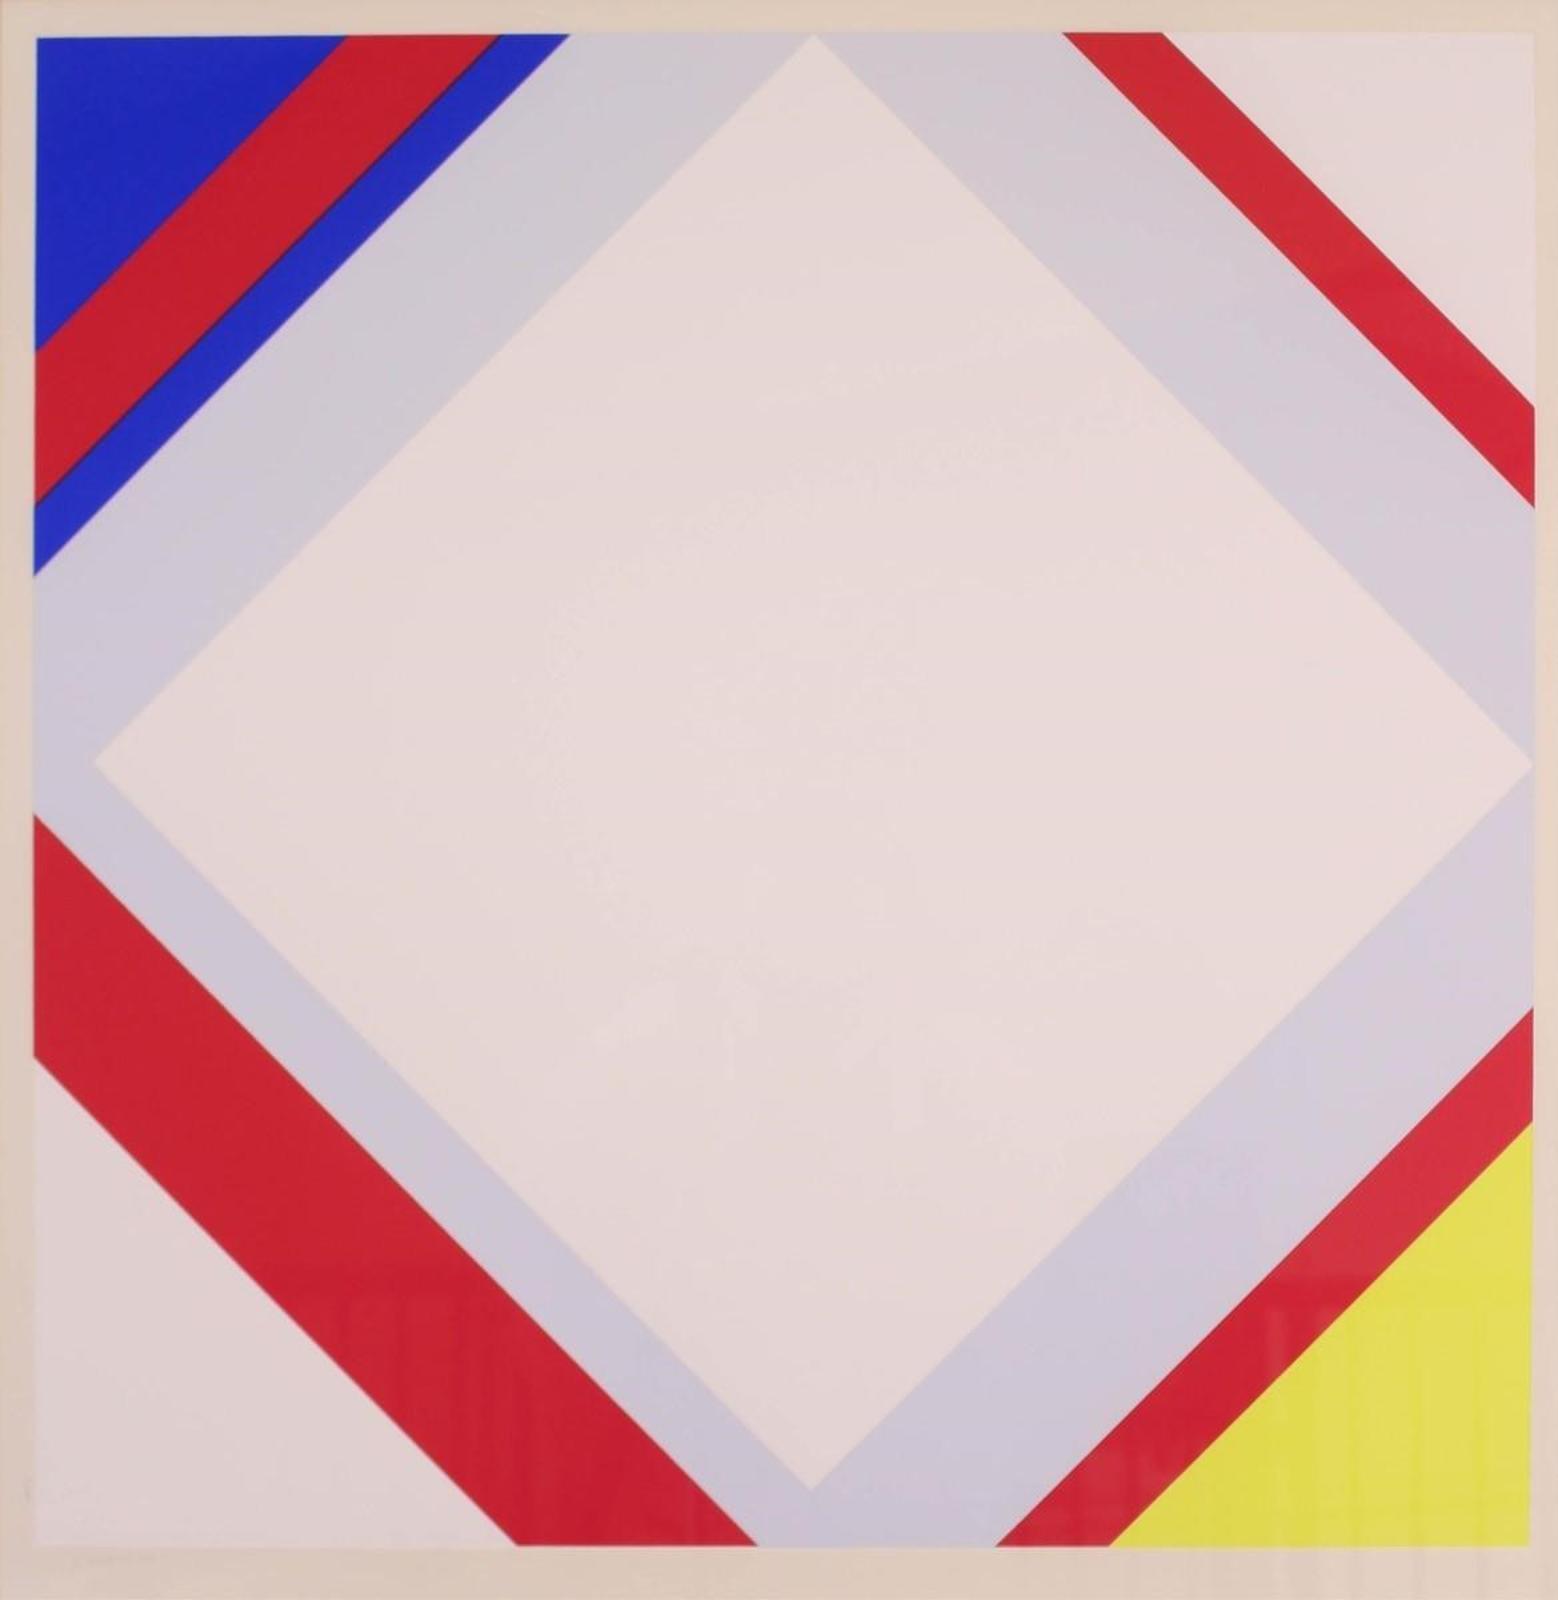 Jean Gorin (1899-1981) - Untitled, Abstract Composition; 1975; ed. #2/200